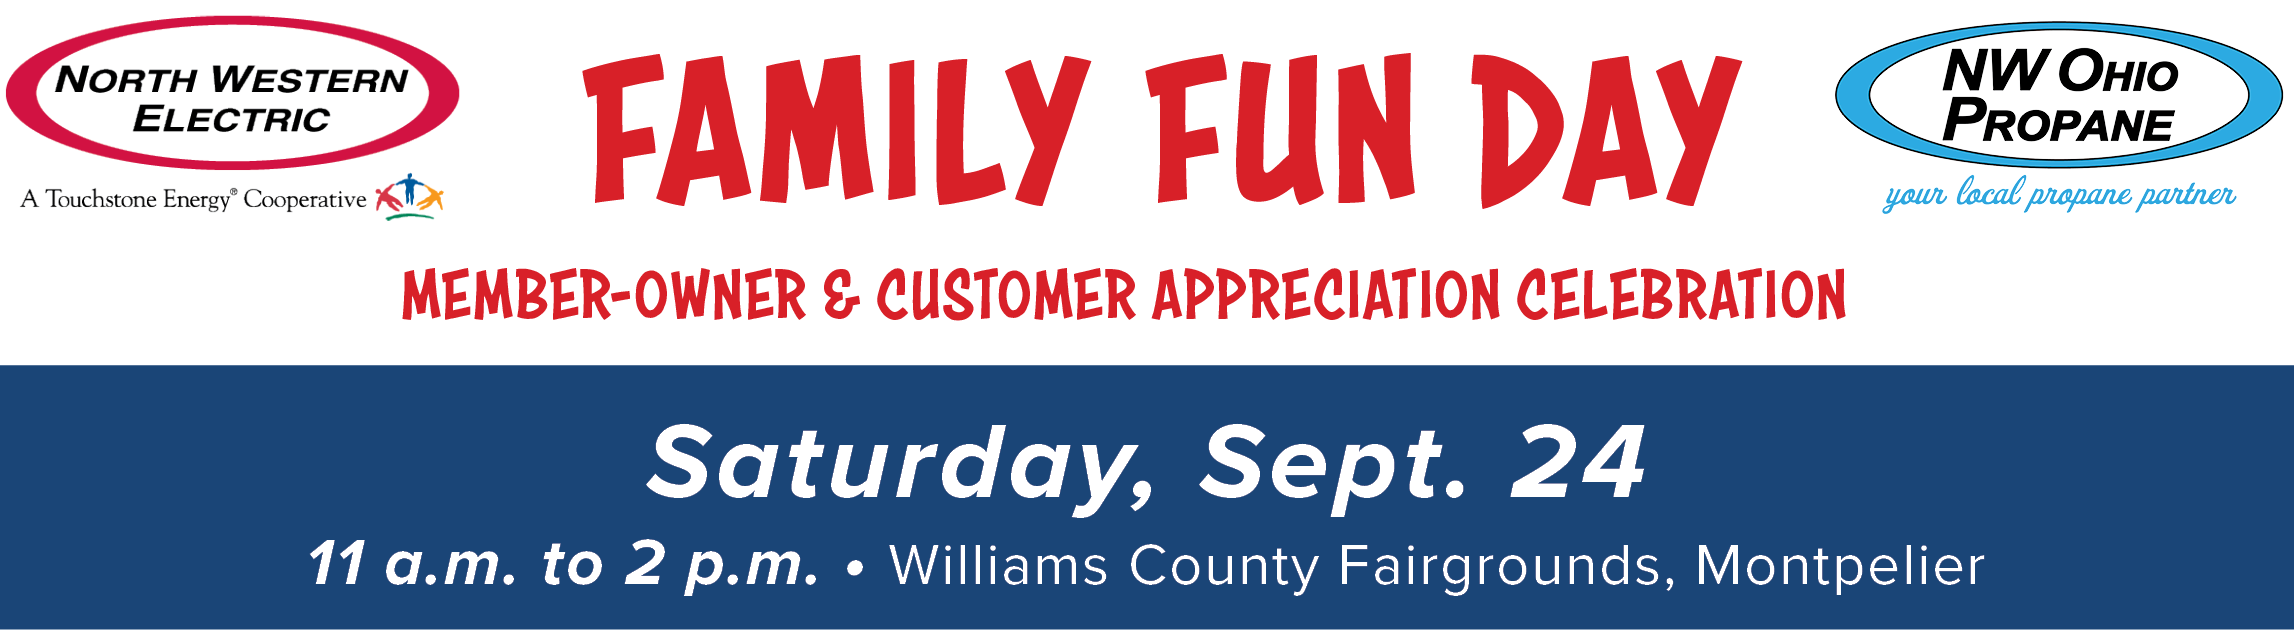 Family Fun Day Header with two logos